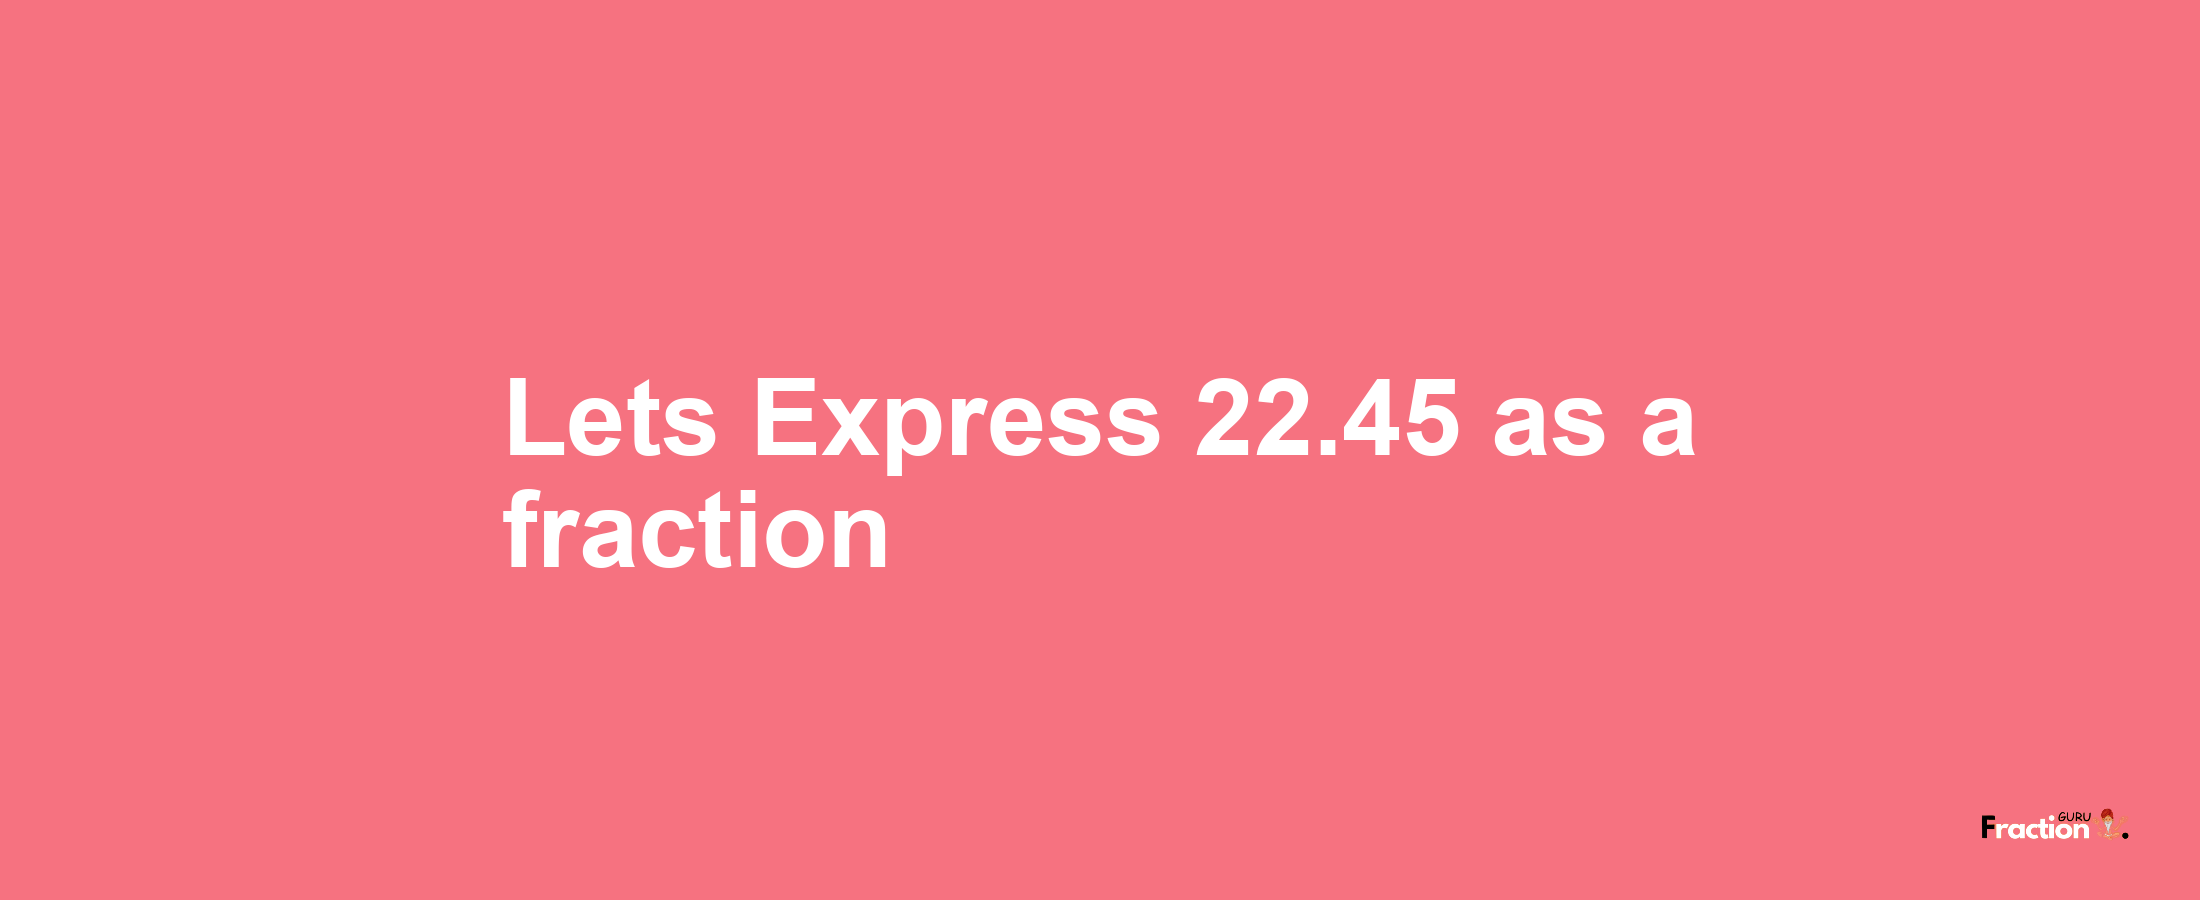 Lets Express 22.45 as afraction